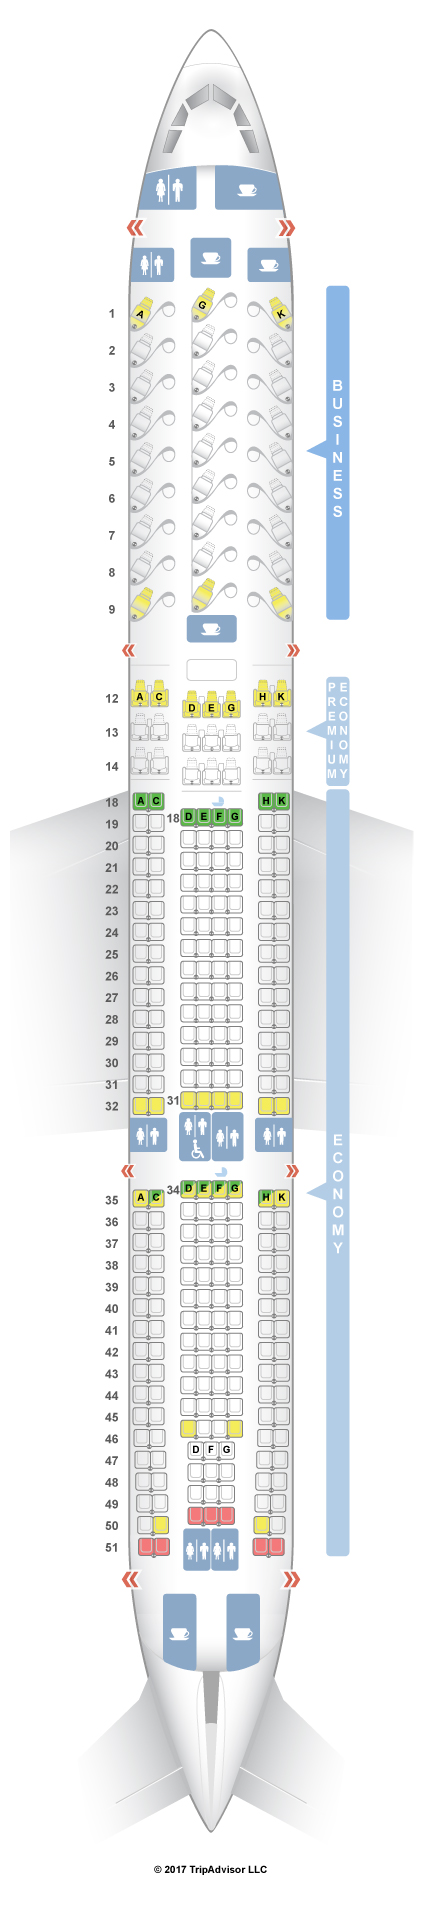 seat assignments air canada